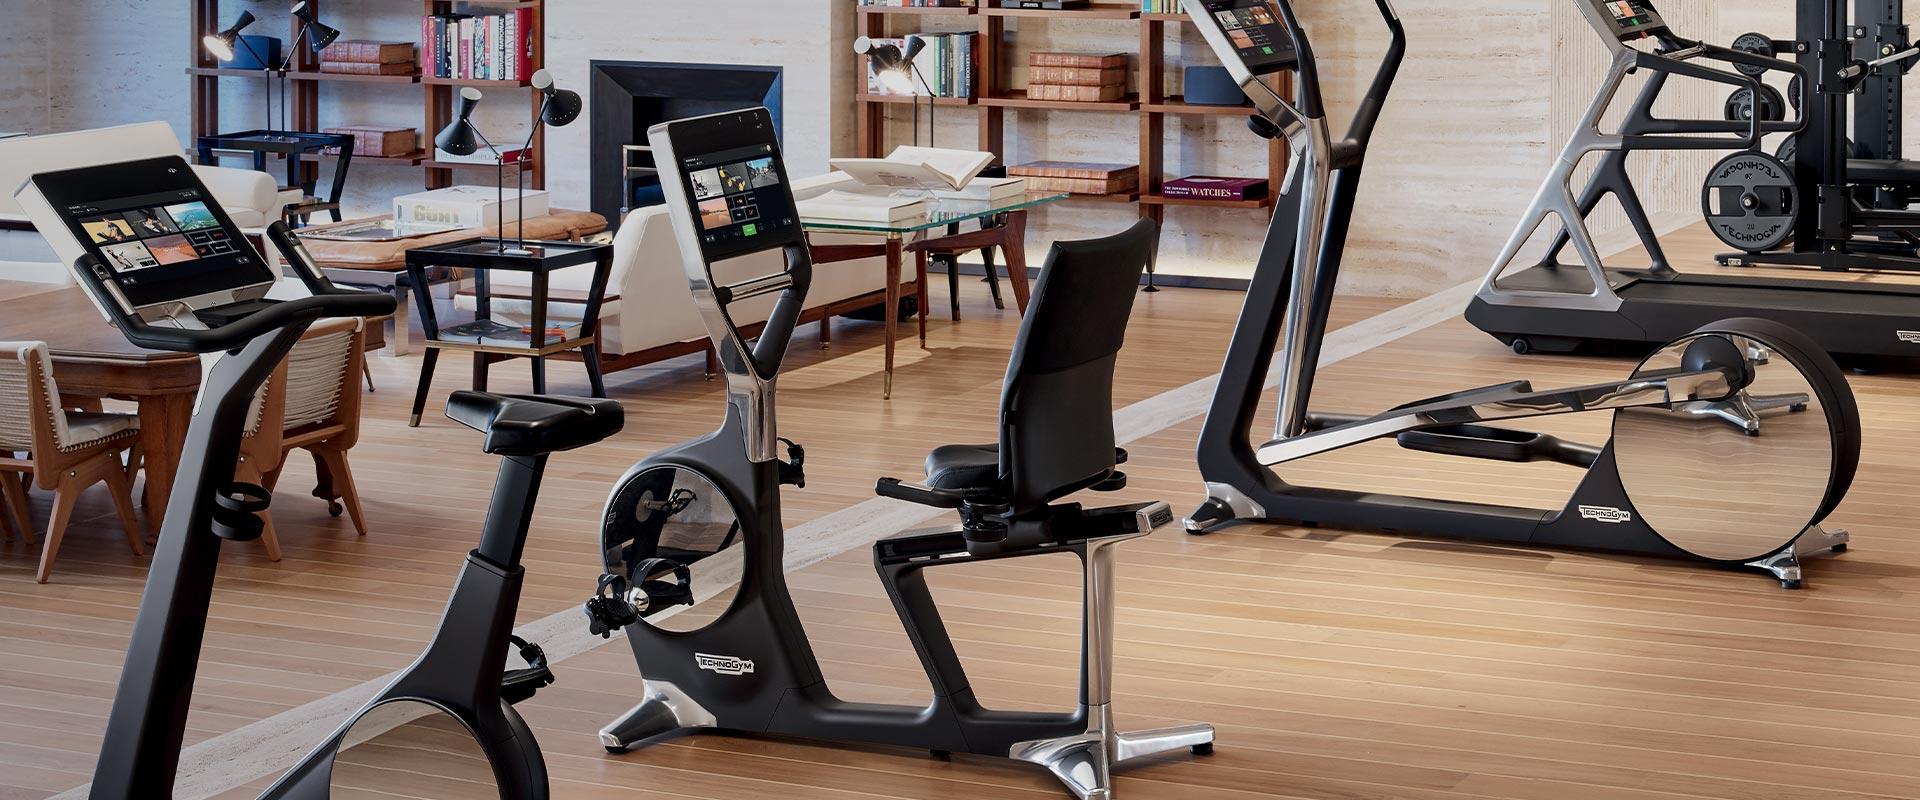 The Technogym Board of Directors approved the half-yearly financial report as of June 30, 2019